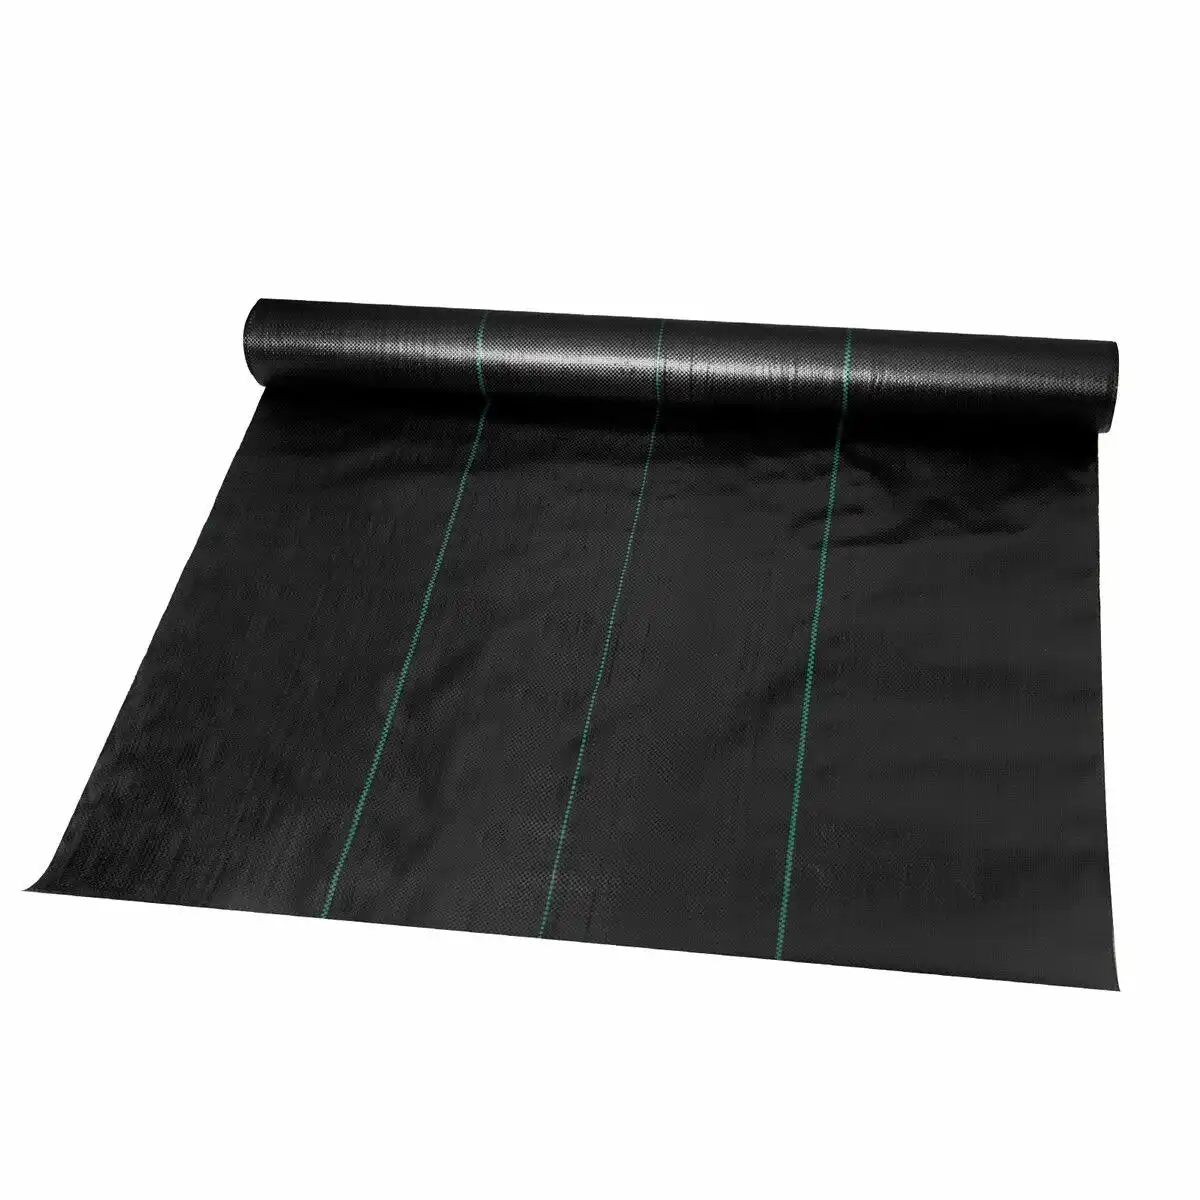 OGL Weed Mat Ground Cover Control Barrier Gardening Block Landscape Guard Plastic 90GSM 0.915 x 100M